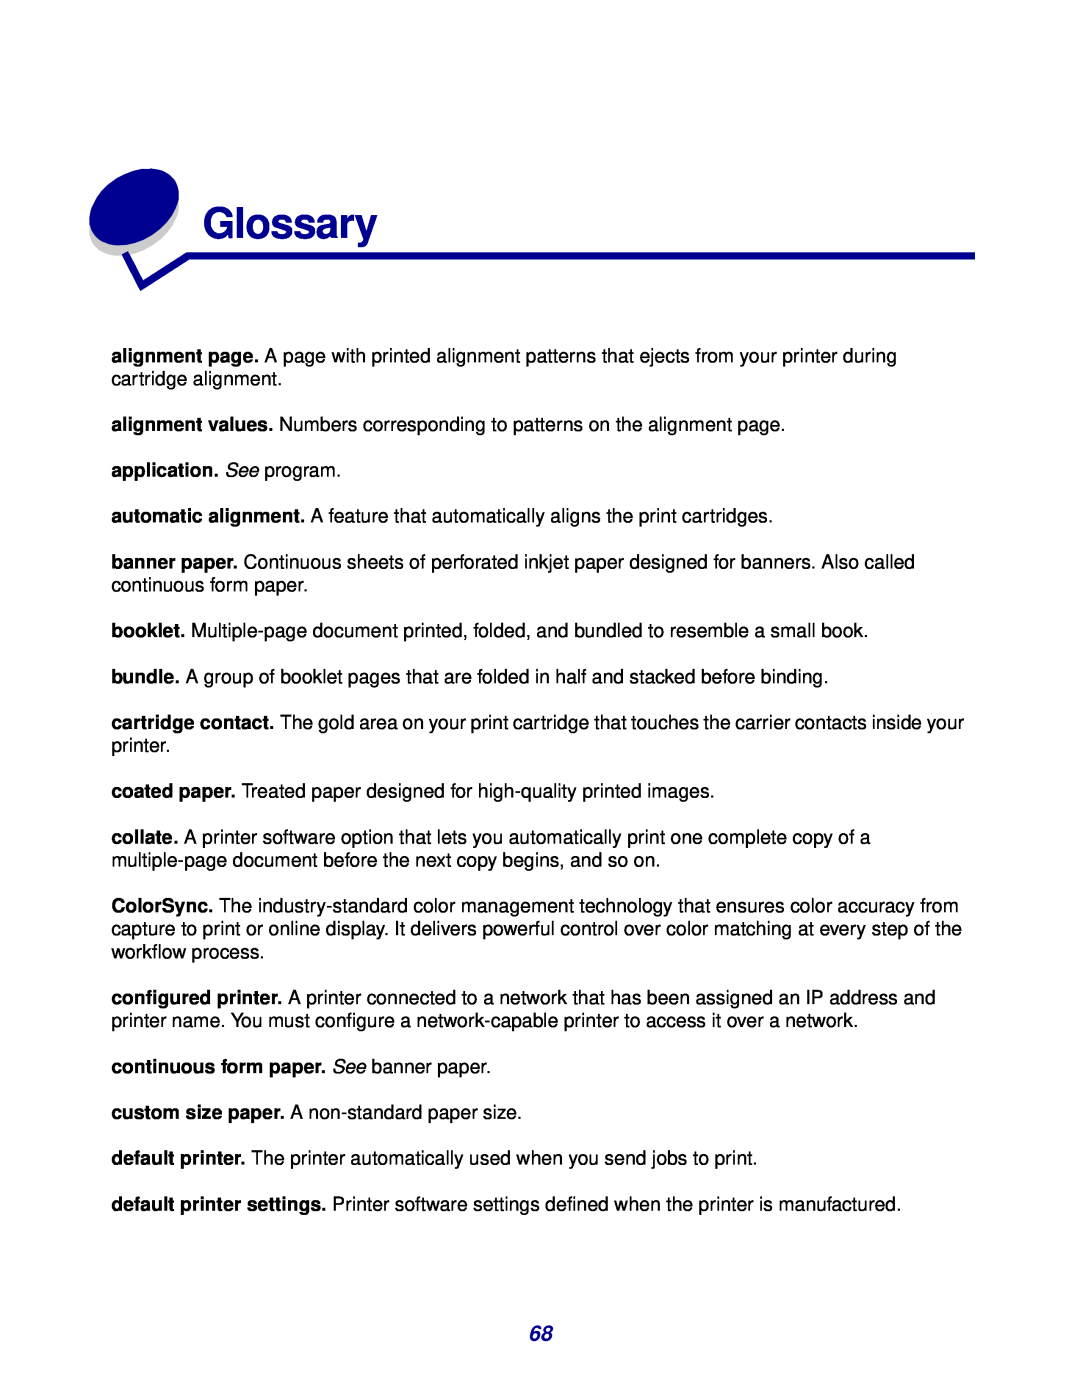 Lexmark Z600 Series manual Glossary, application. See program, continuous form paper. See banner paper 